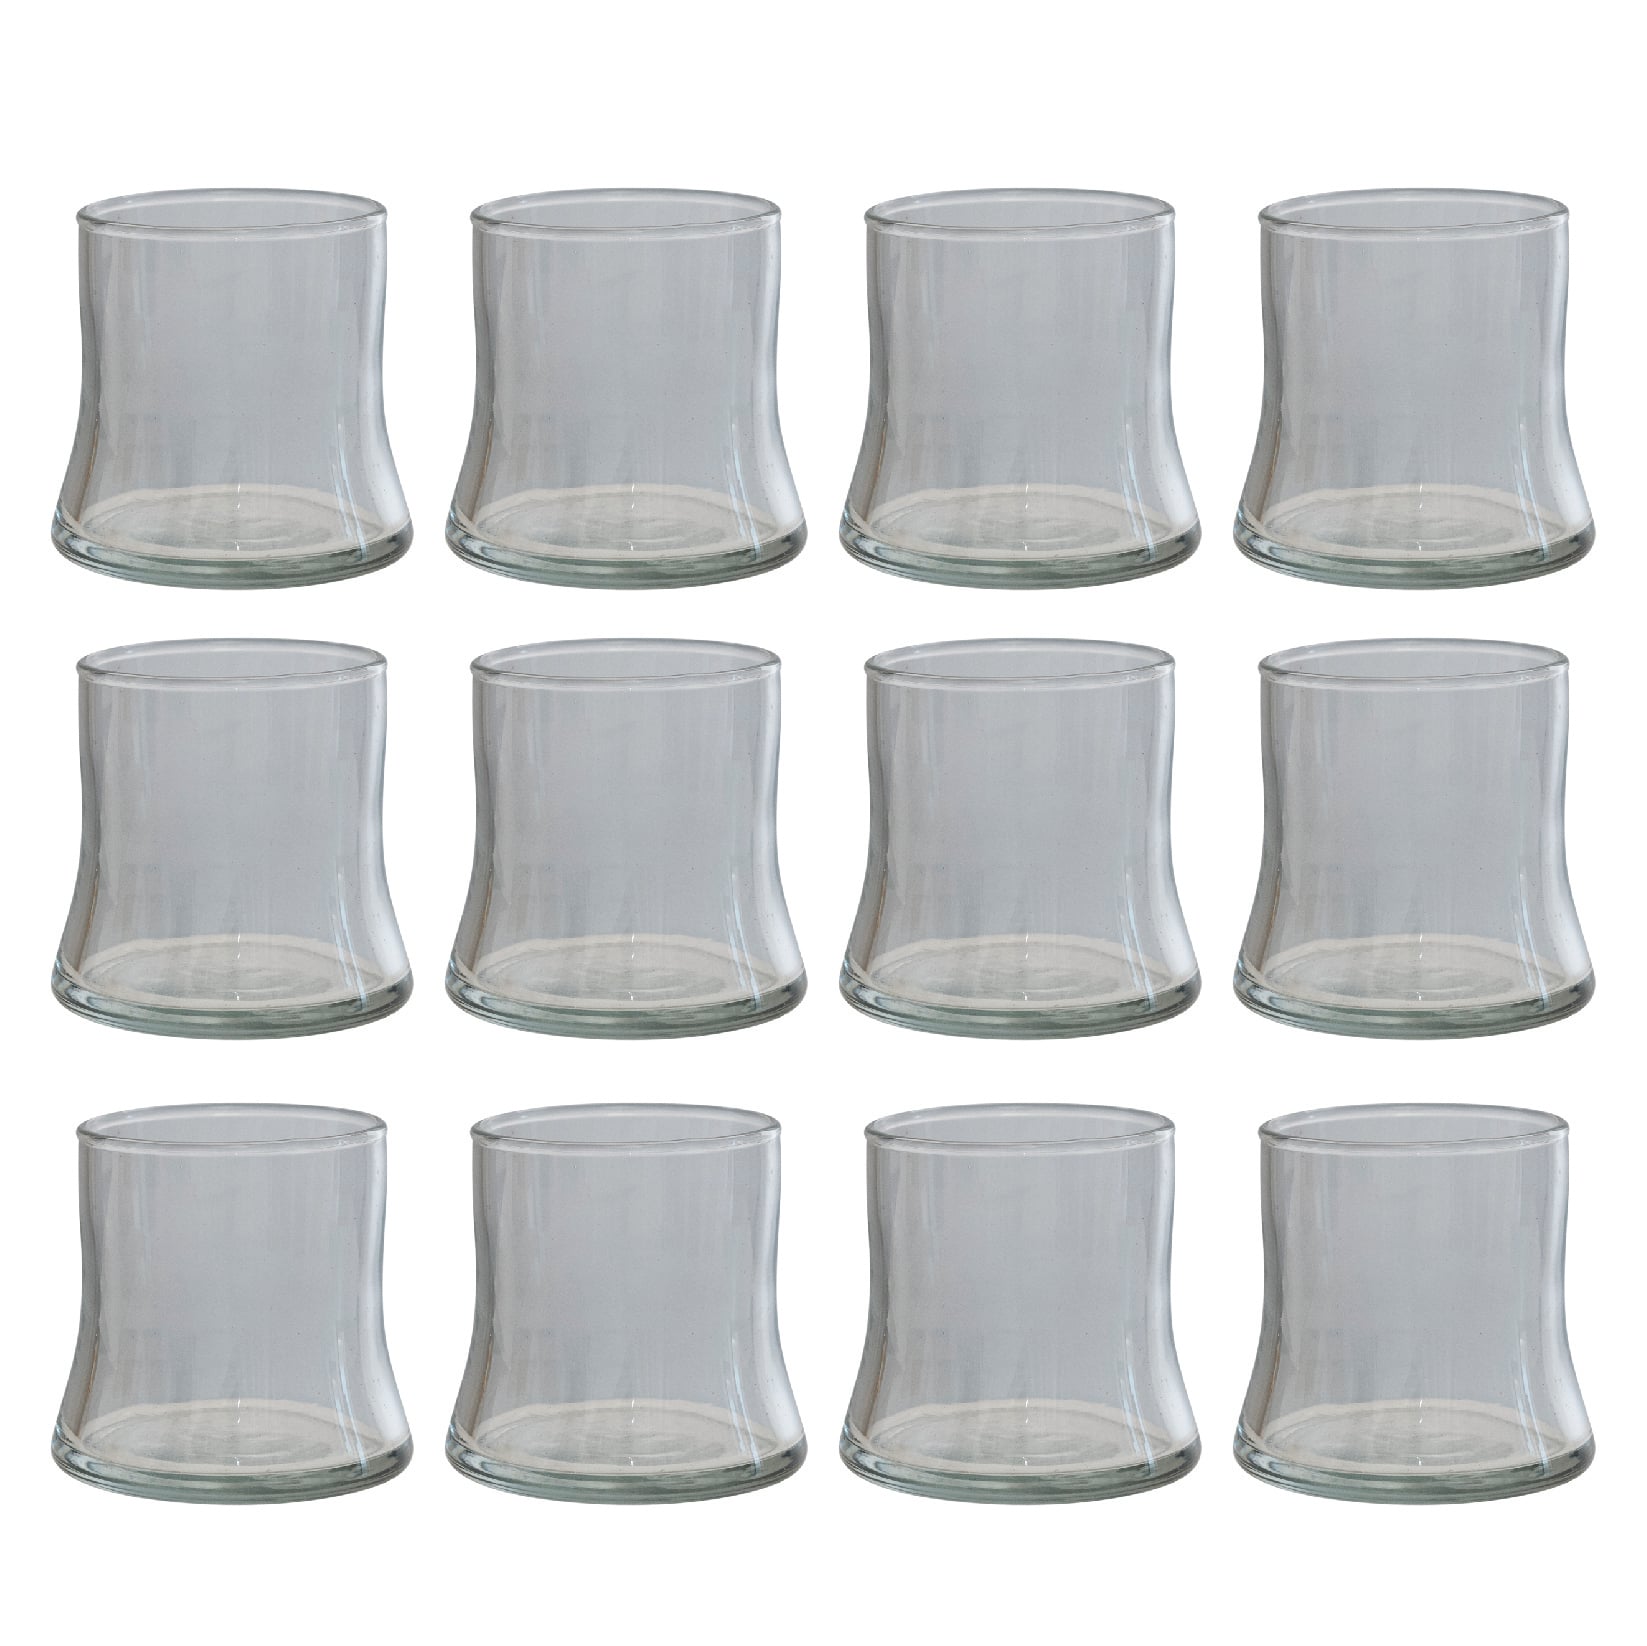 10 oz Drinking Cup Set